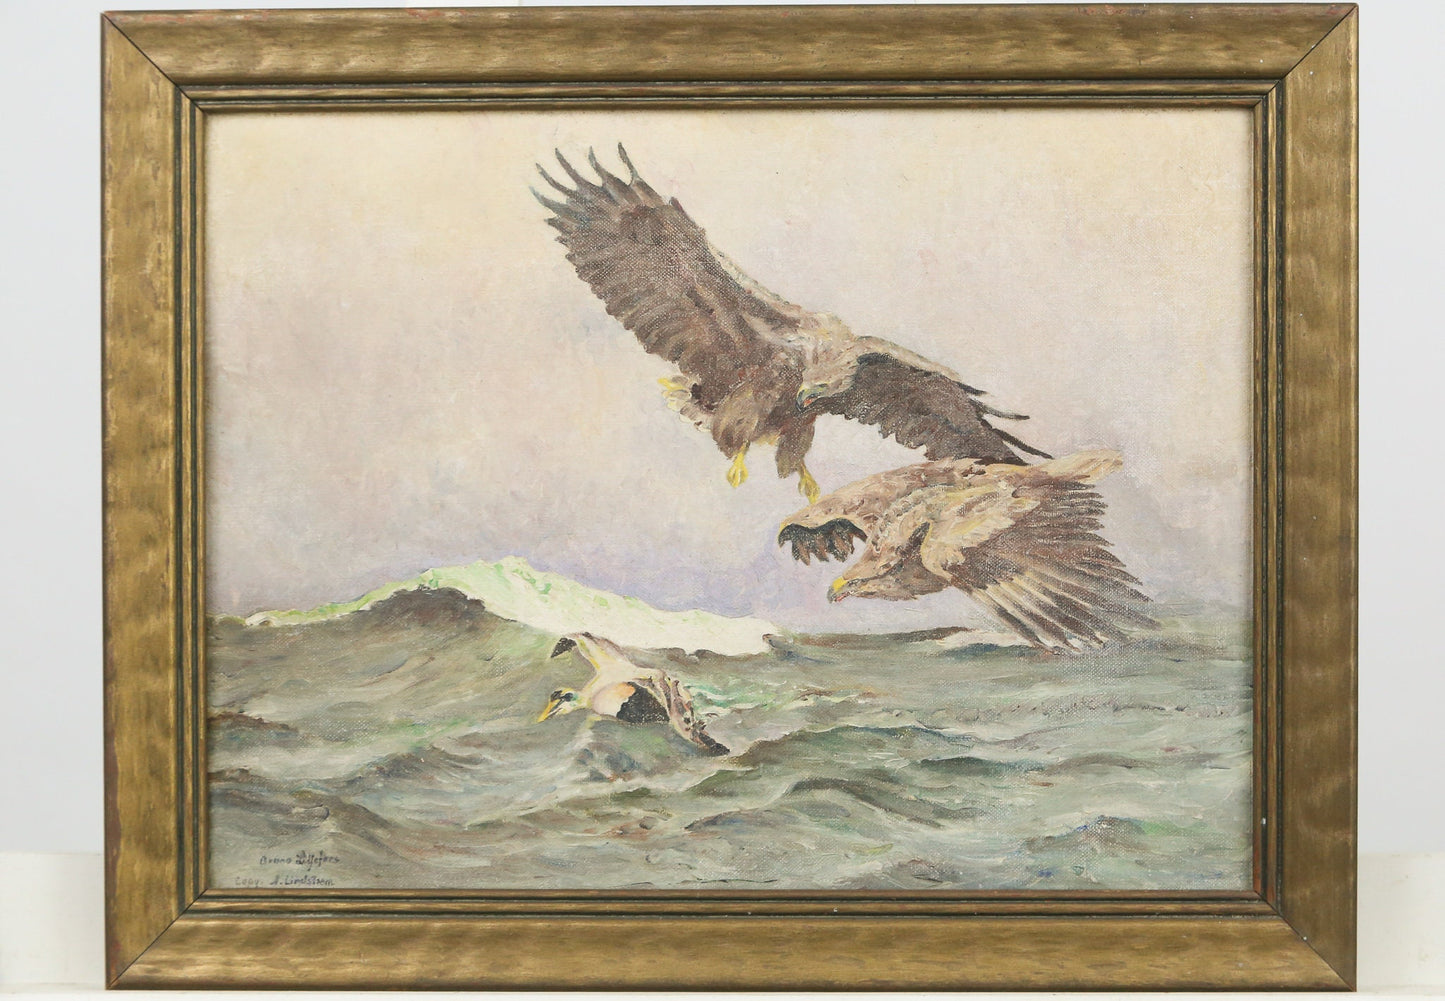 Painting Seascape Eagles Birds Signed Copy of A. Lindstrom 1930